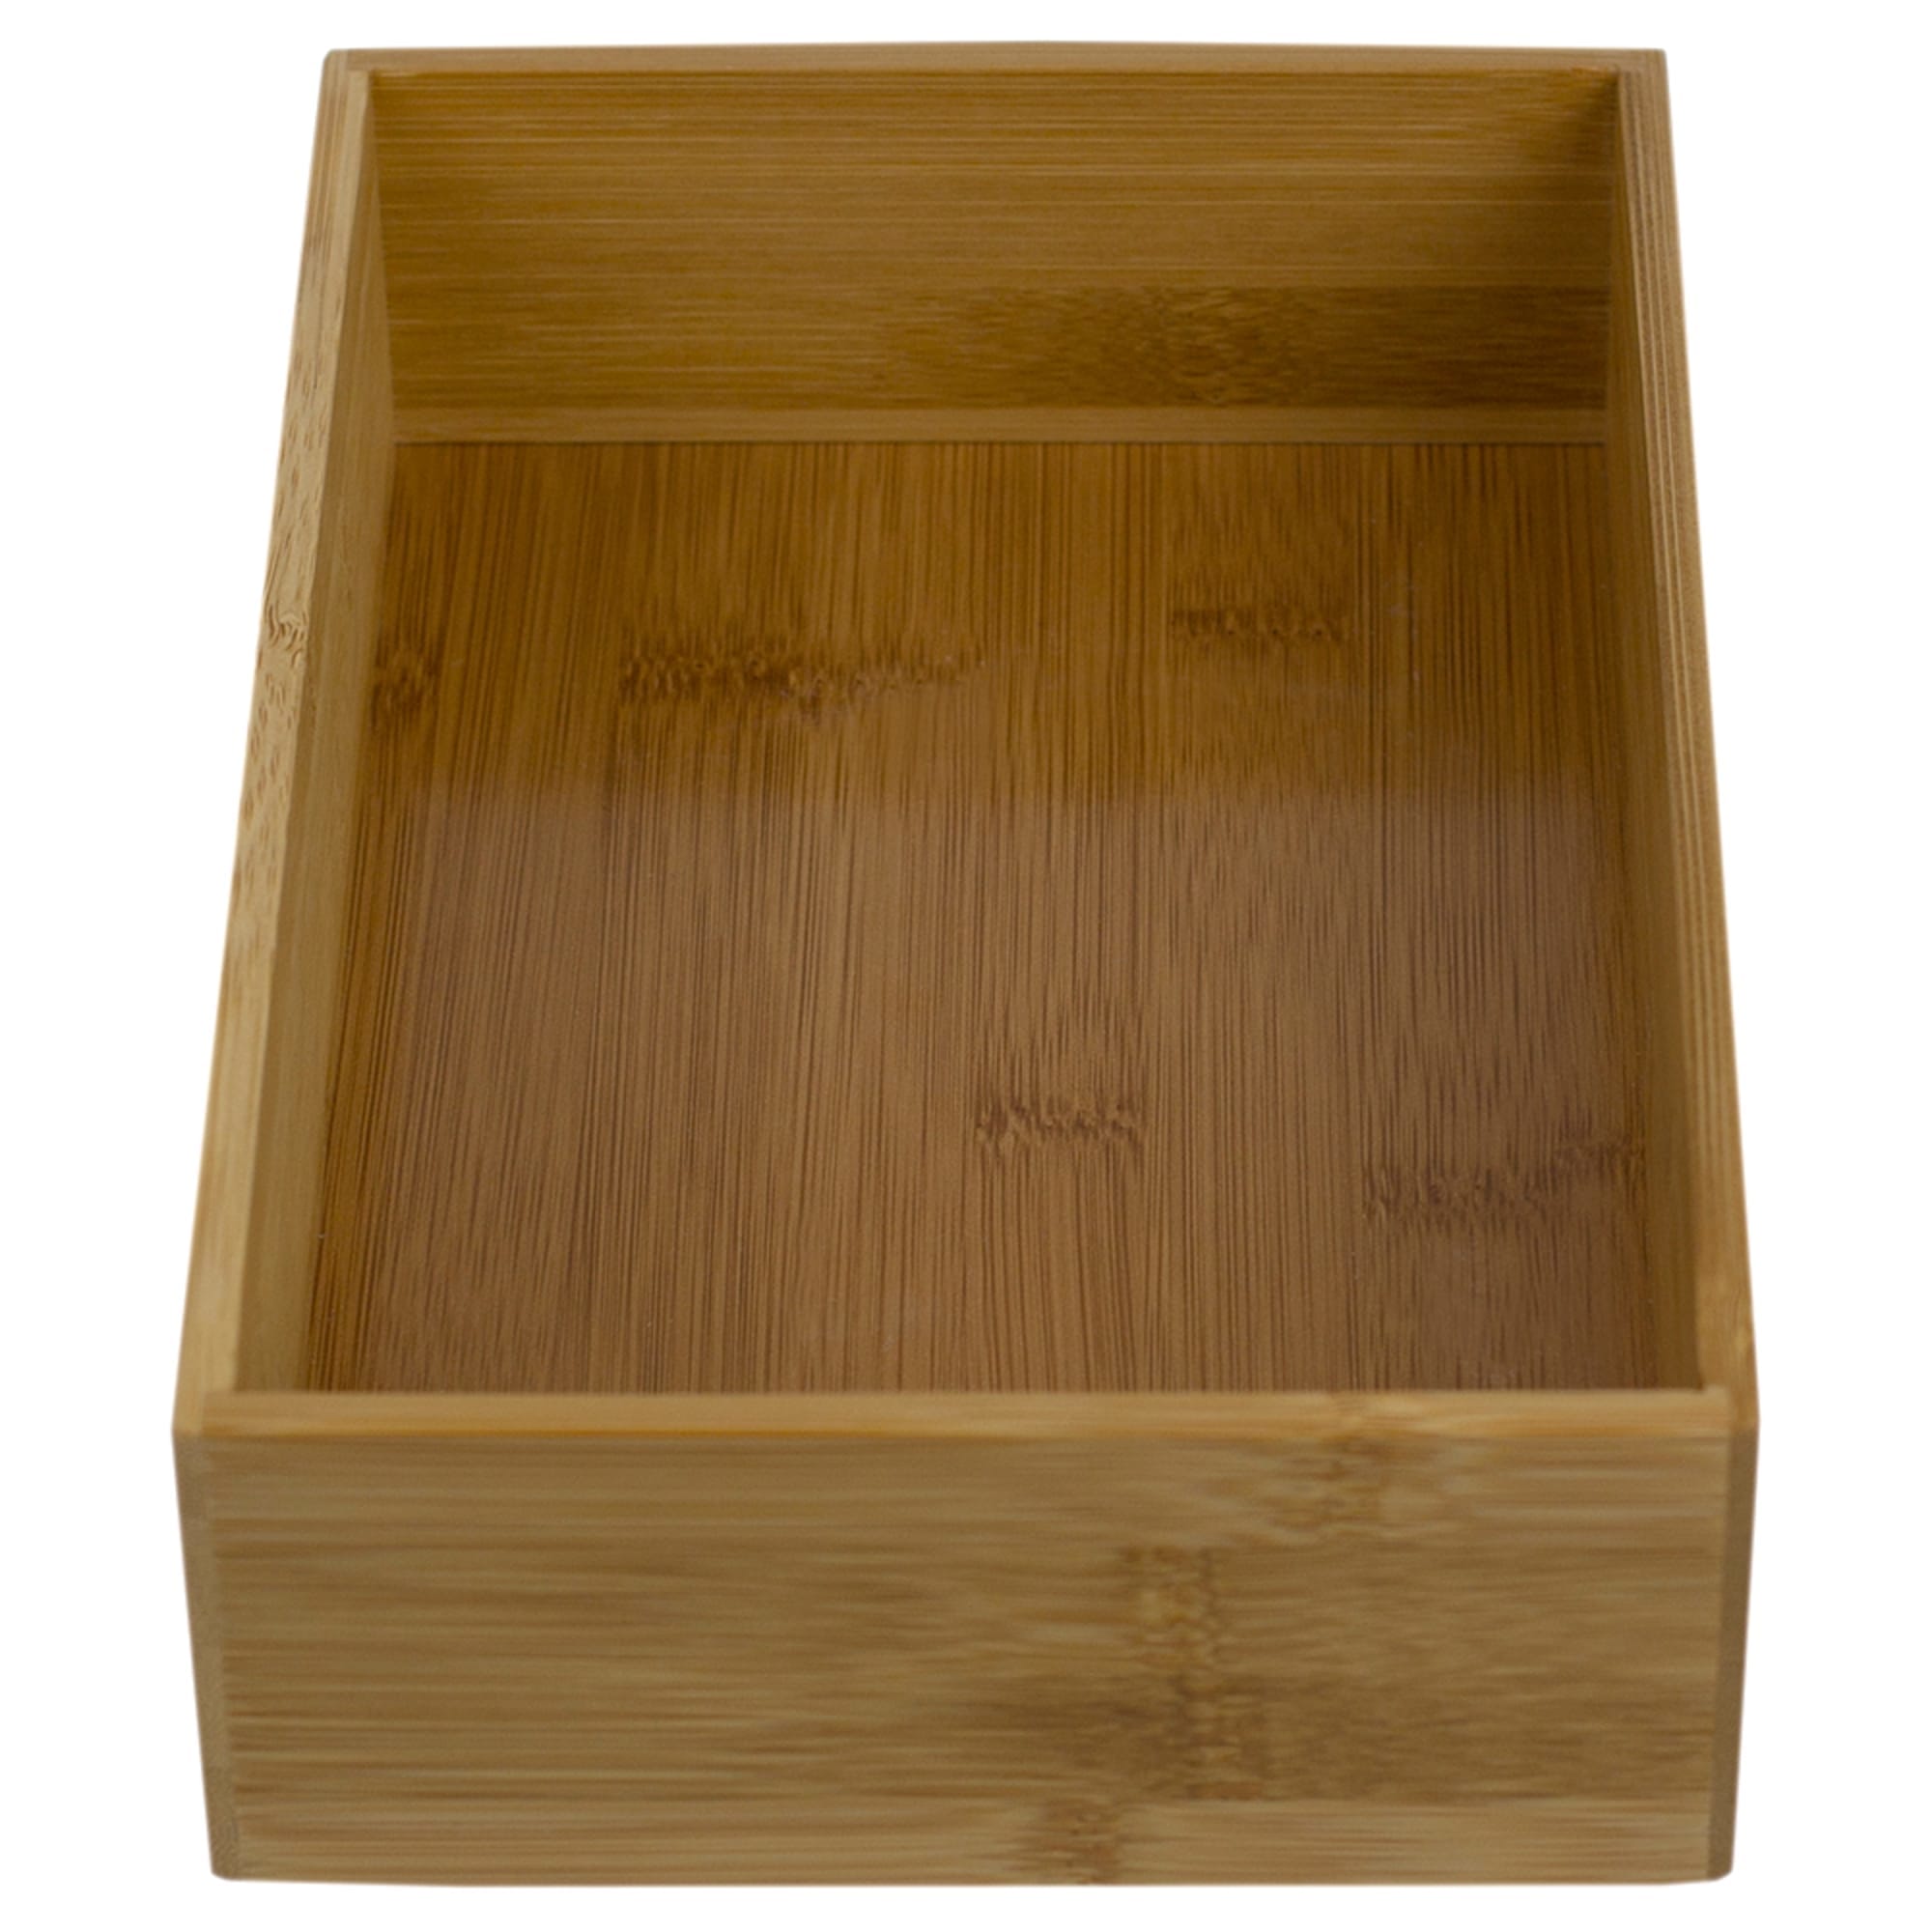 Home Basics 6" x 9" Bamboo Drawer Organizer, Natural $6.00 EACH, CASE PACK OF 12